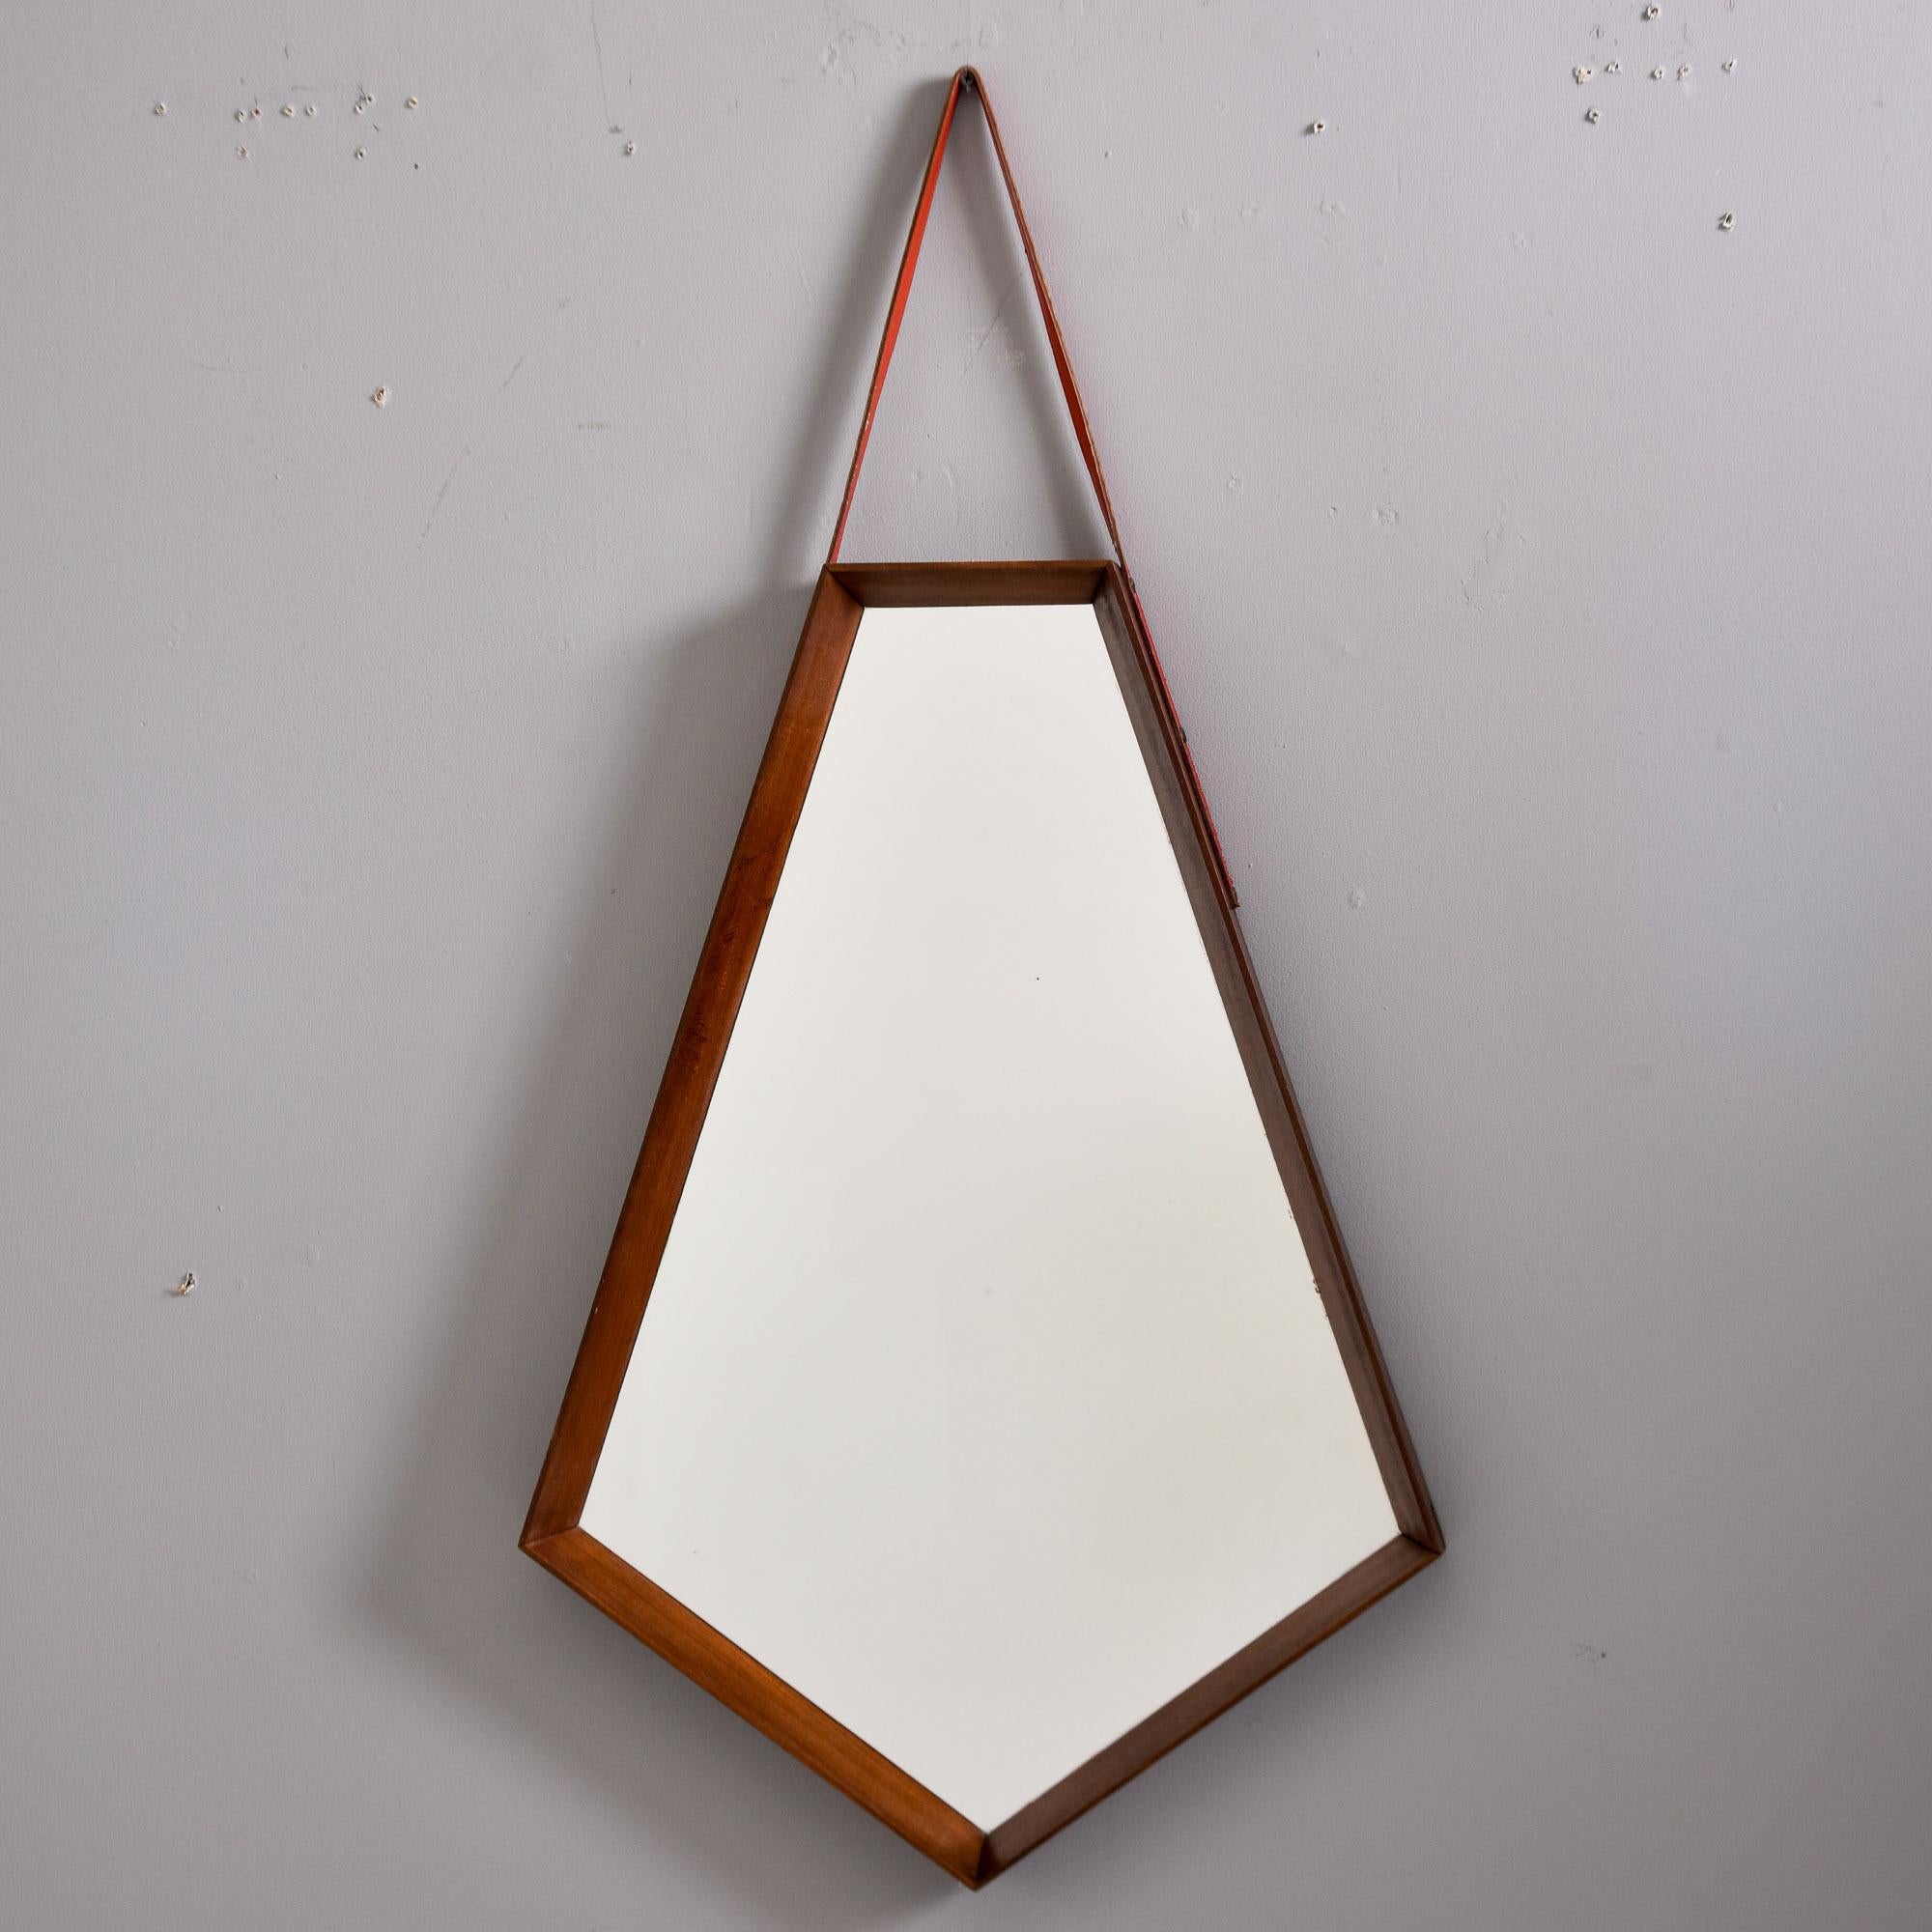 Found in Italy, this mid century mirror has a narrow walnut frame with a five-sided mirror inset and leather hanging strap. Dates from approximately 1960s. Unknown maker. 

Very good overall vintage condition with minor scattered wear to frame and